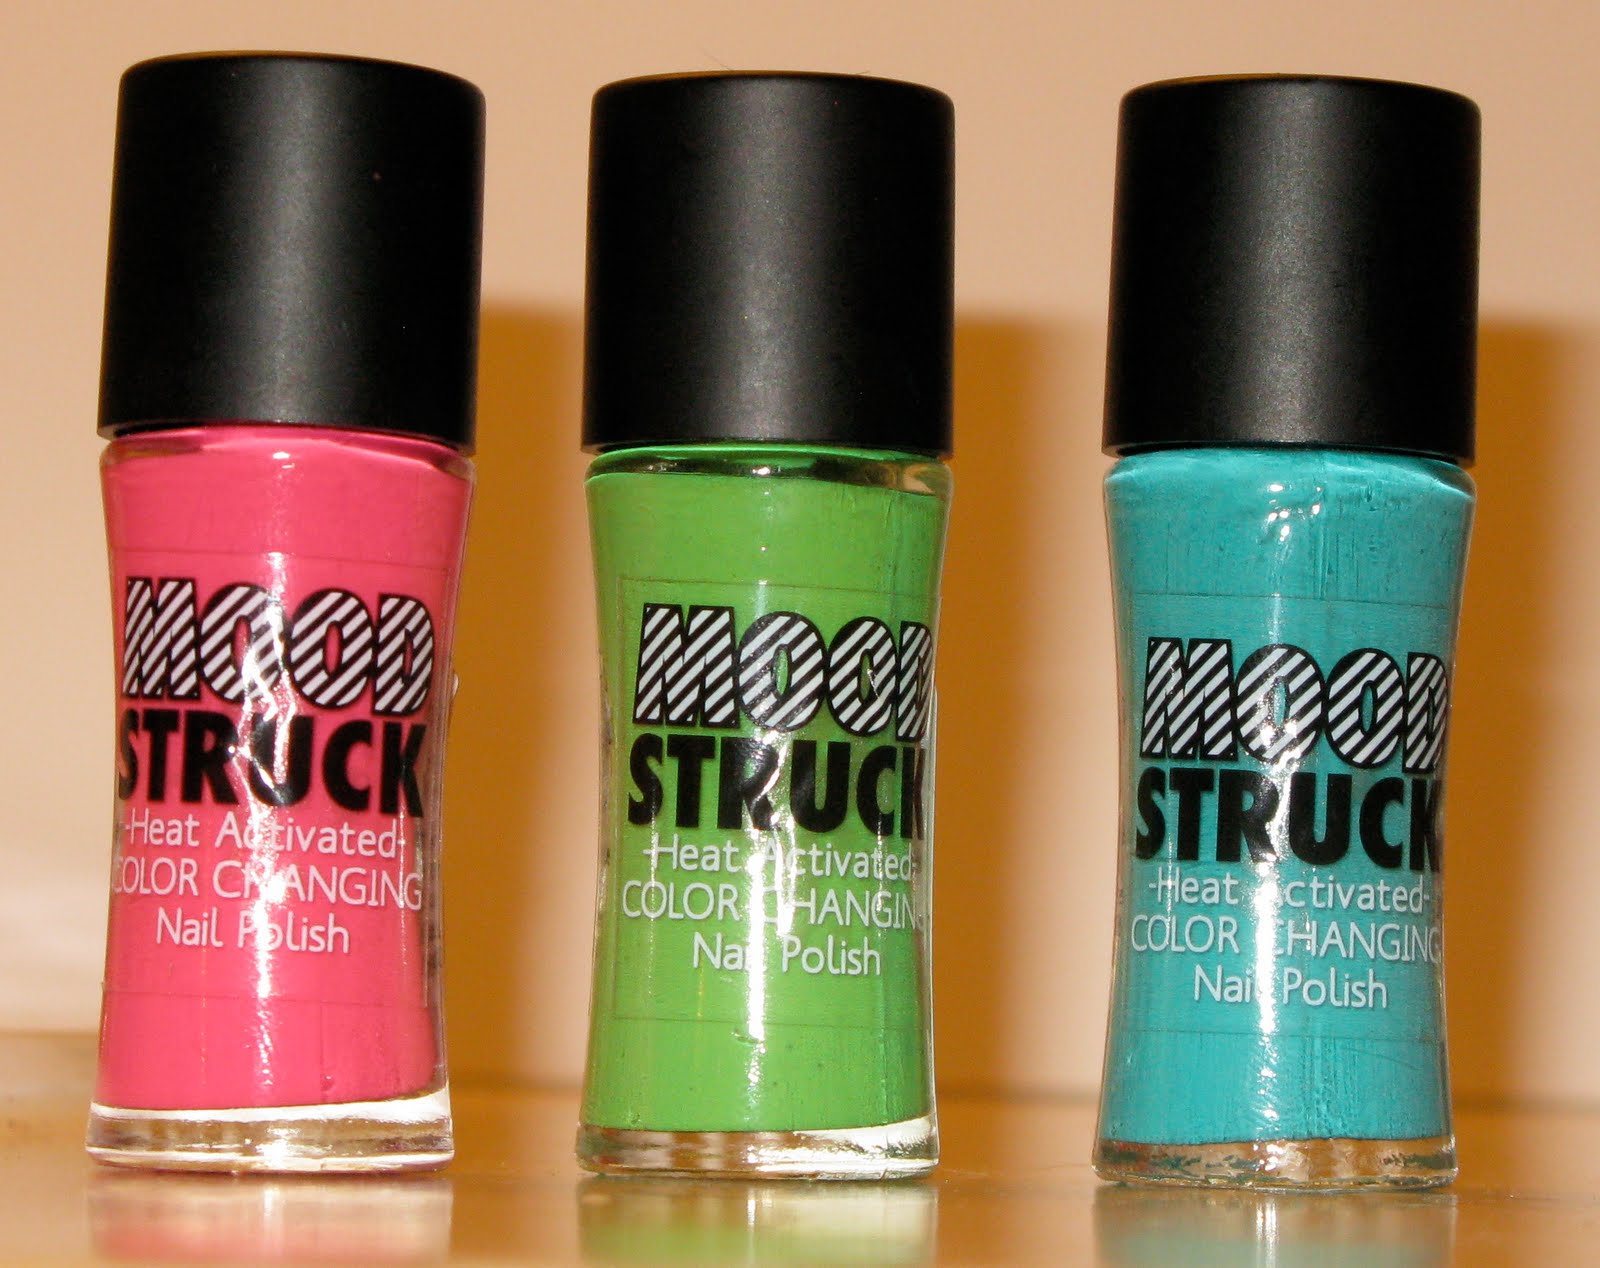 1. Del Sol Color Changing Nail Polish - wide 7